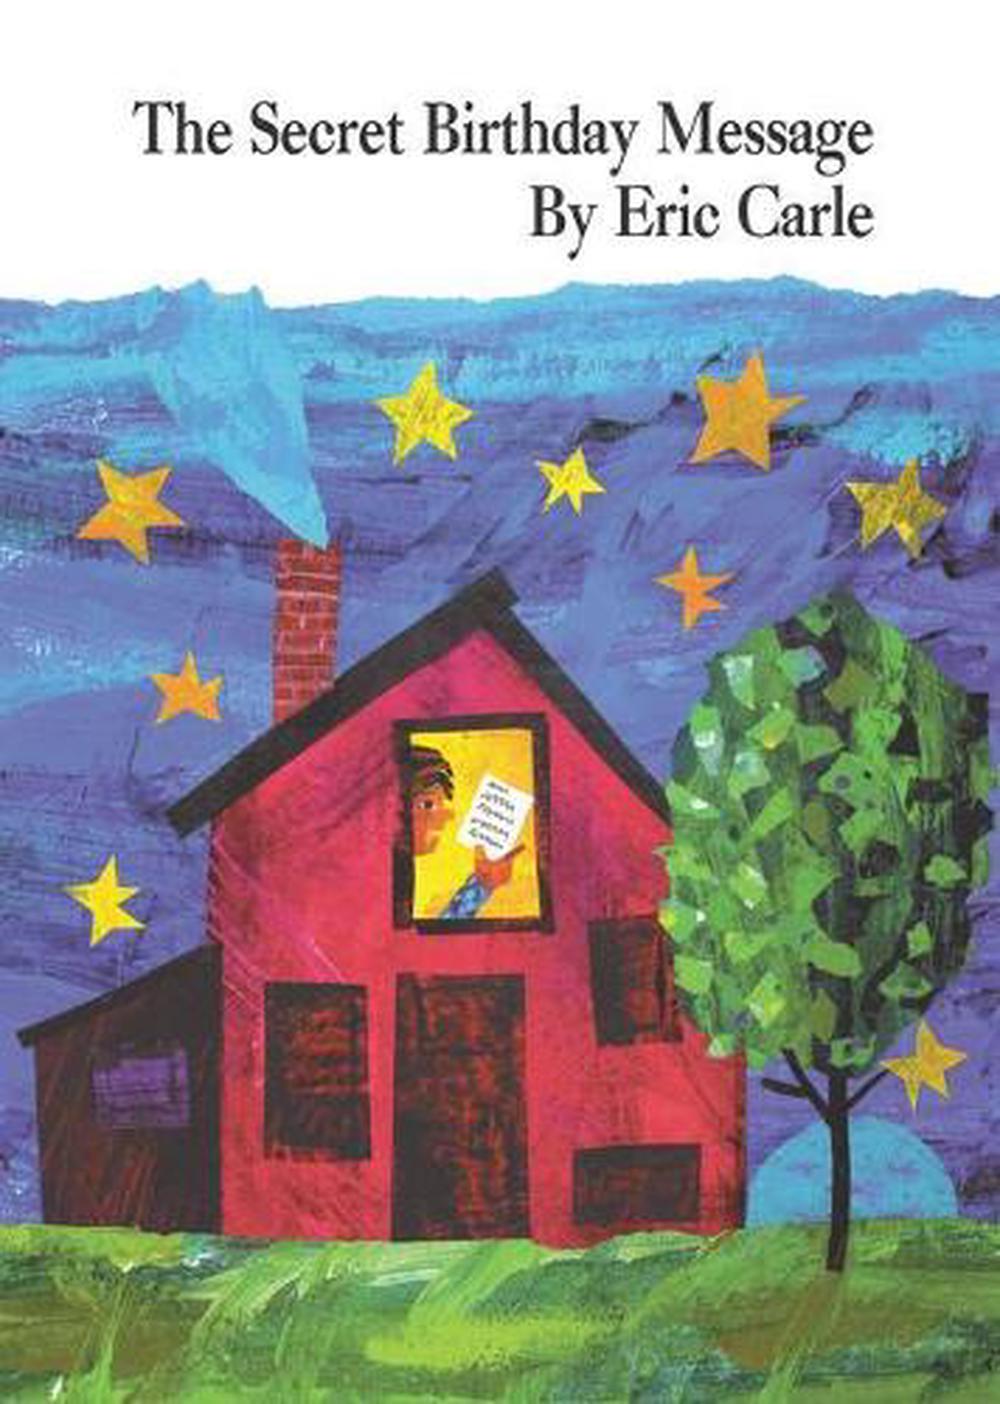 the secret birthday message by eric carle pdf